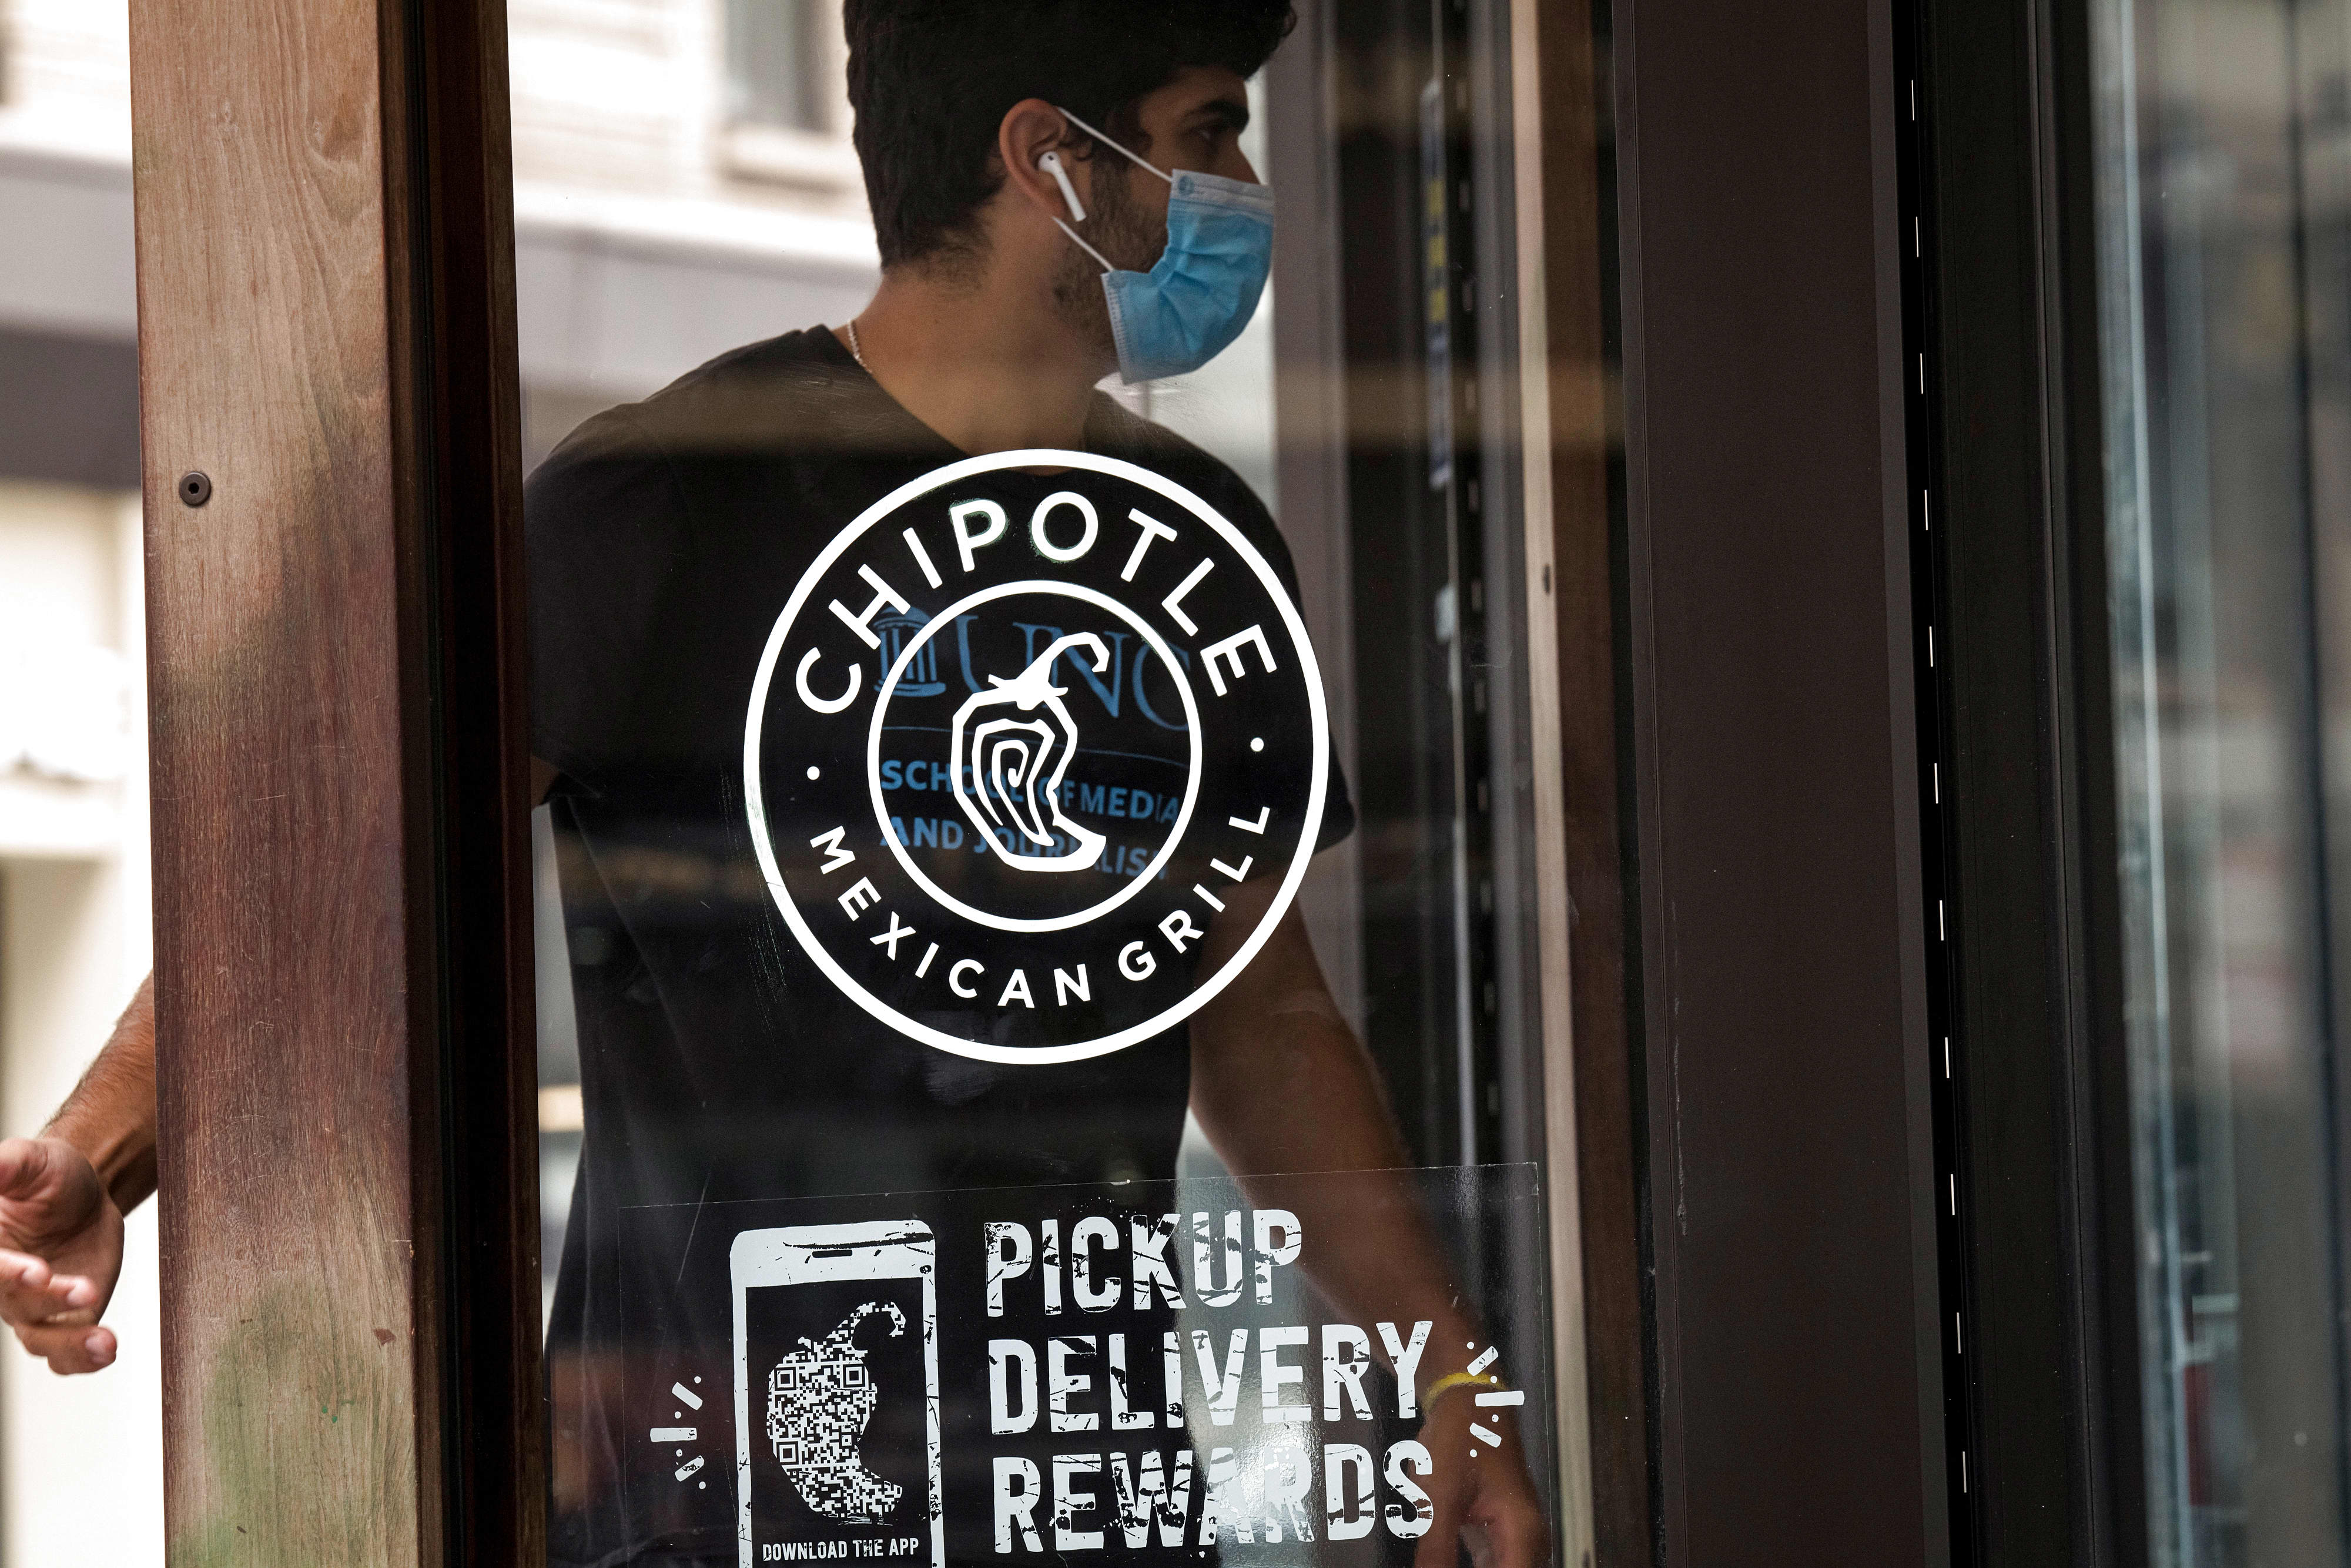 Chipotle’s digital sales remain strong with the reopening of dining halls: CFO